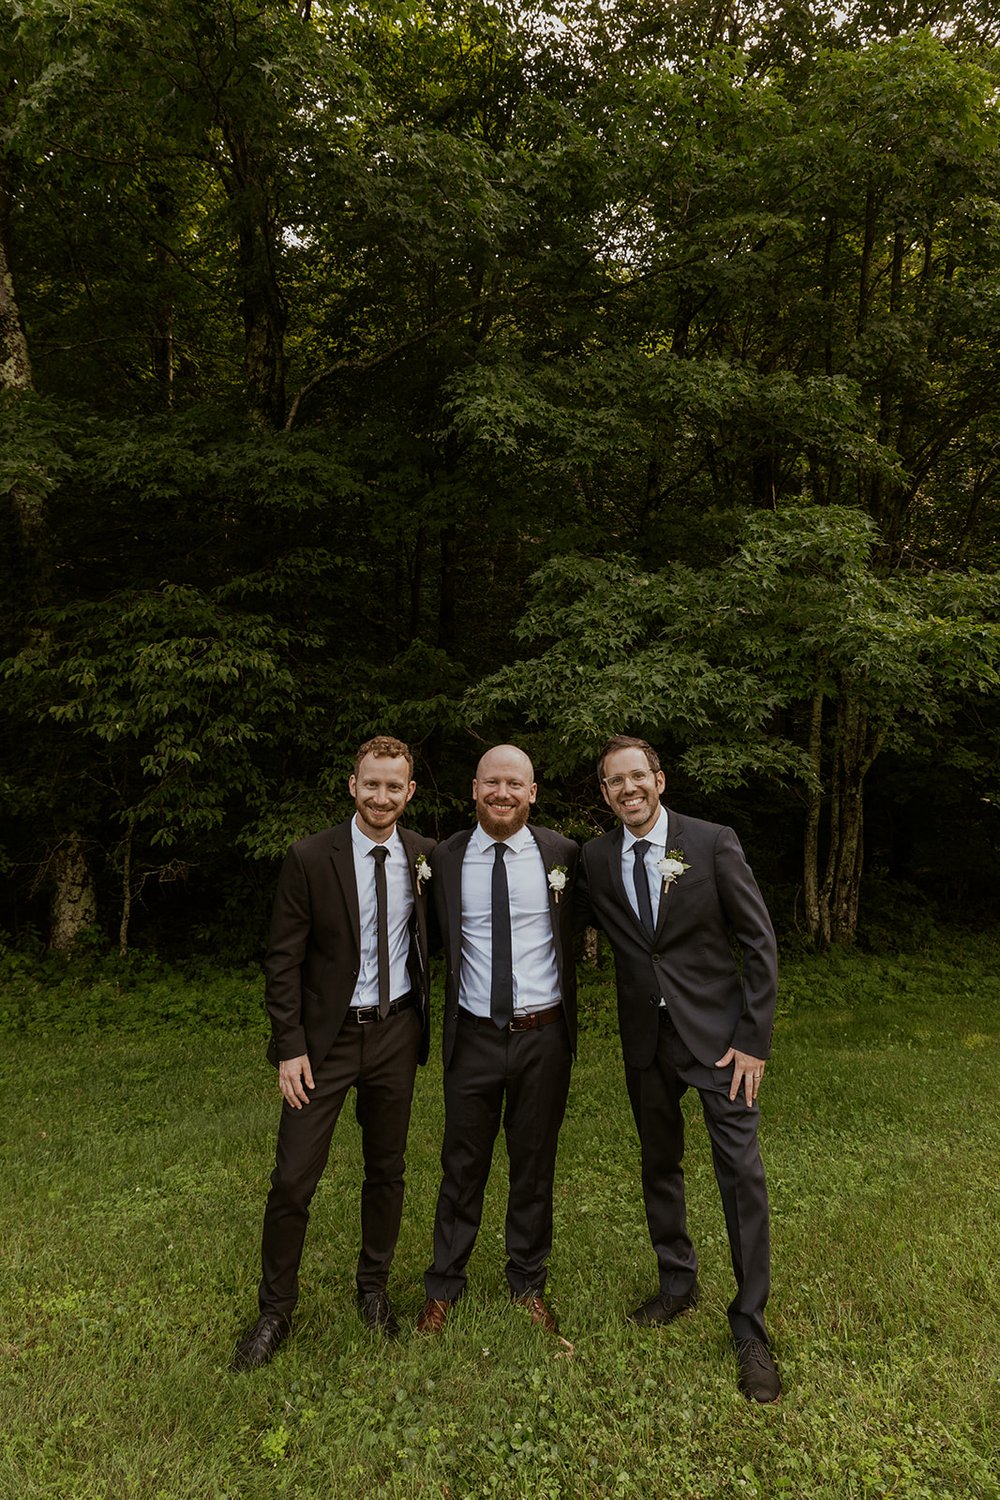 Groomsmen stand side-by-side with big smiles